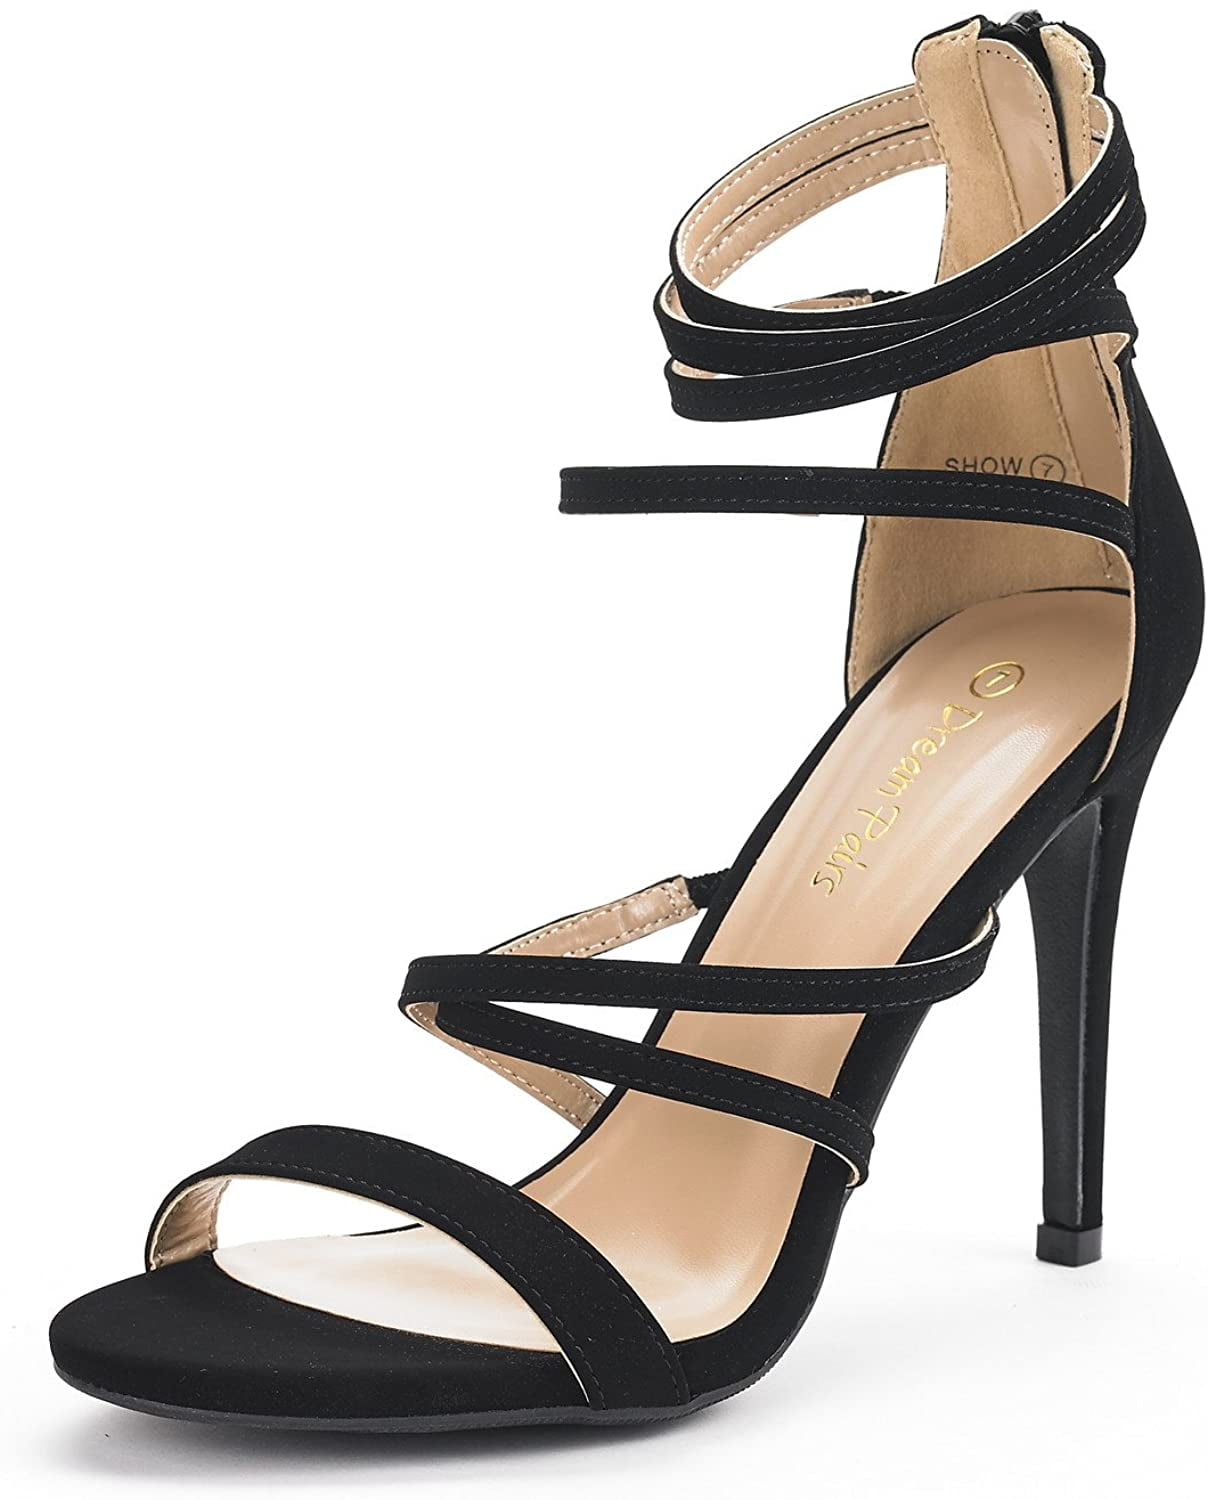 Dream Pairs - Dream Pairs Womens Heeled Strappy Sandals Dress Shoes ...